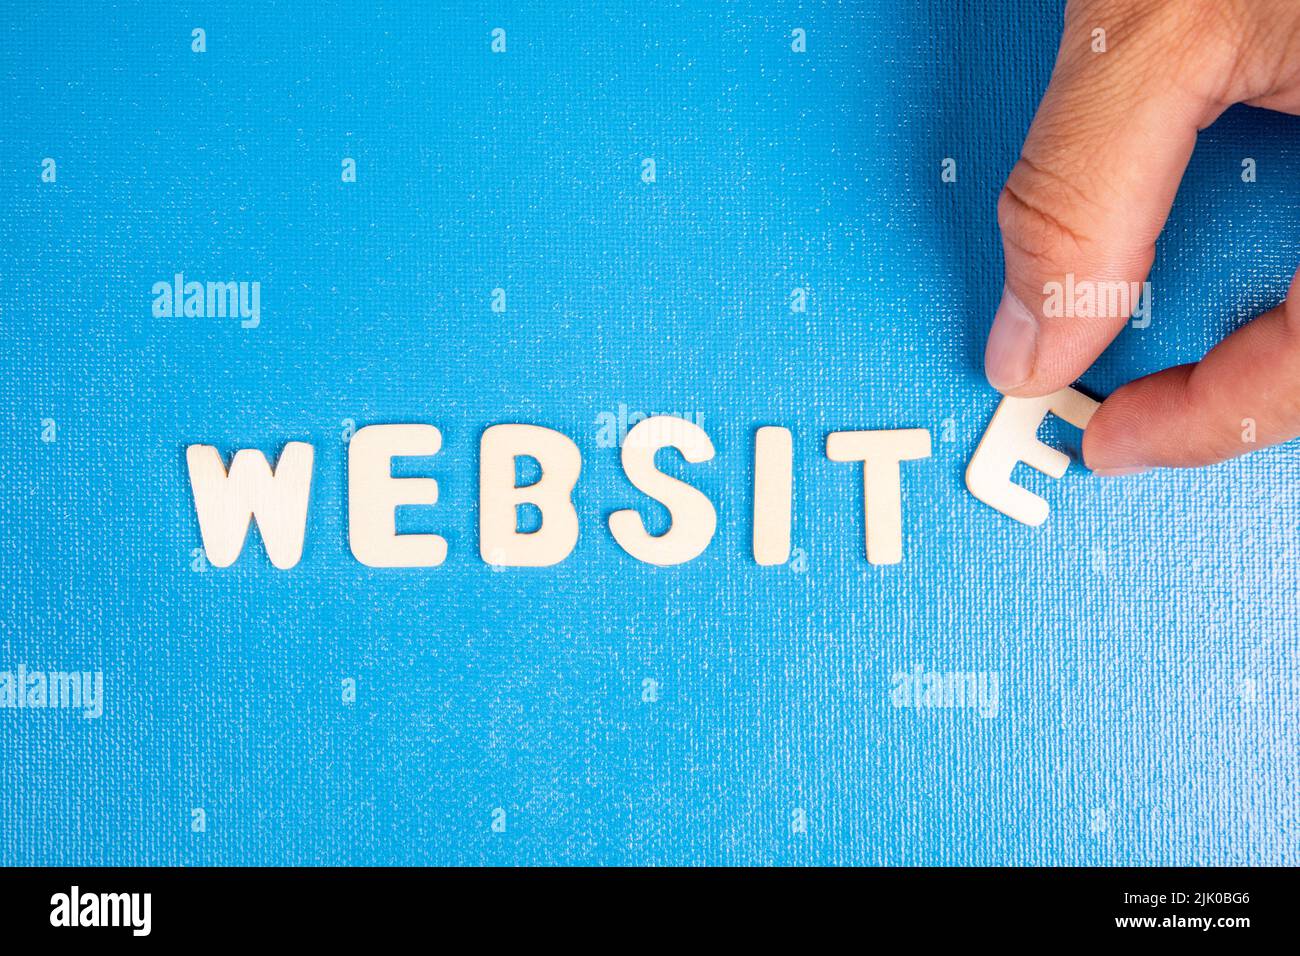 Website. Text from white wooden letters on a blue background. Stock Photo